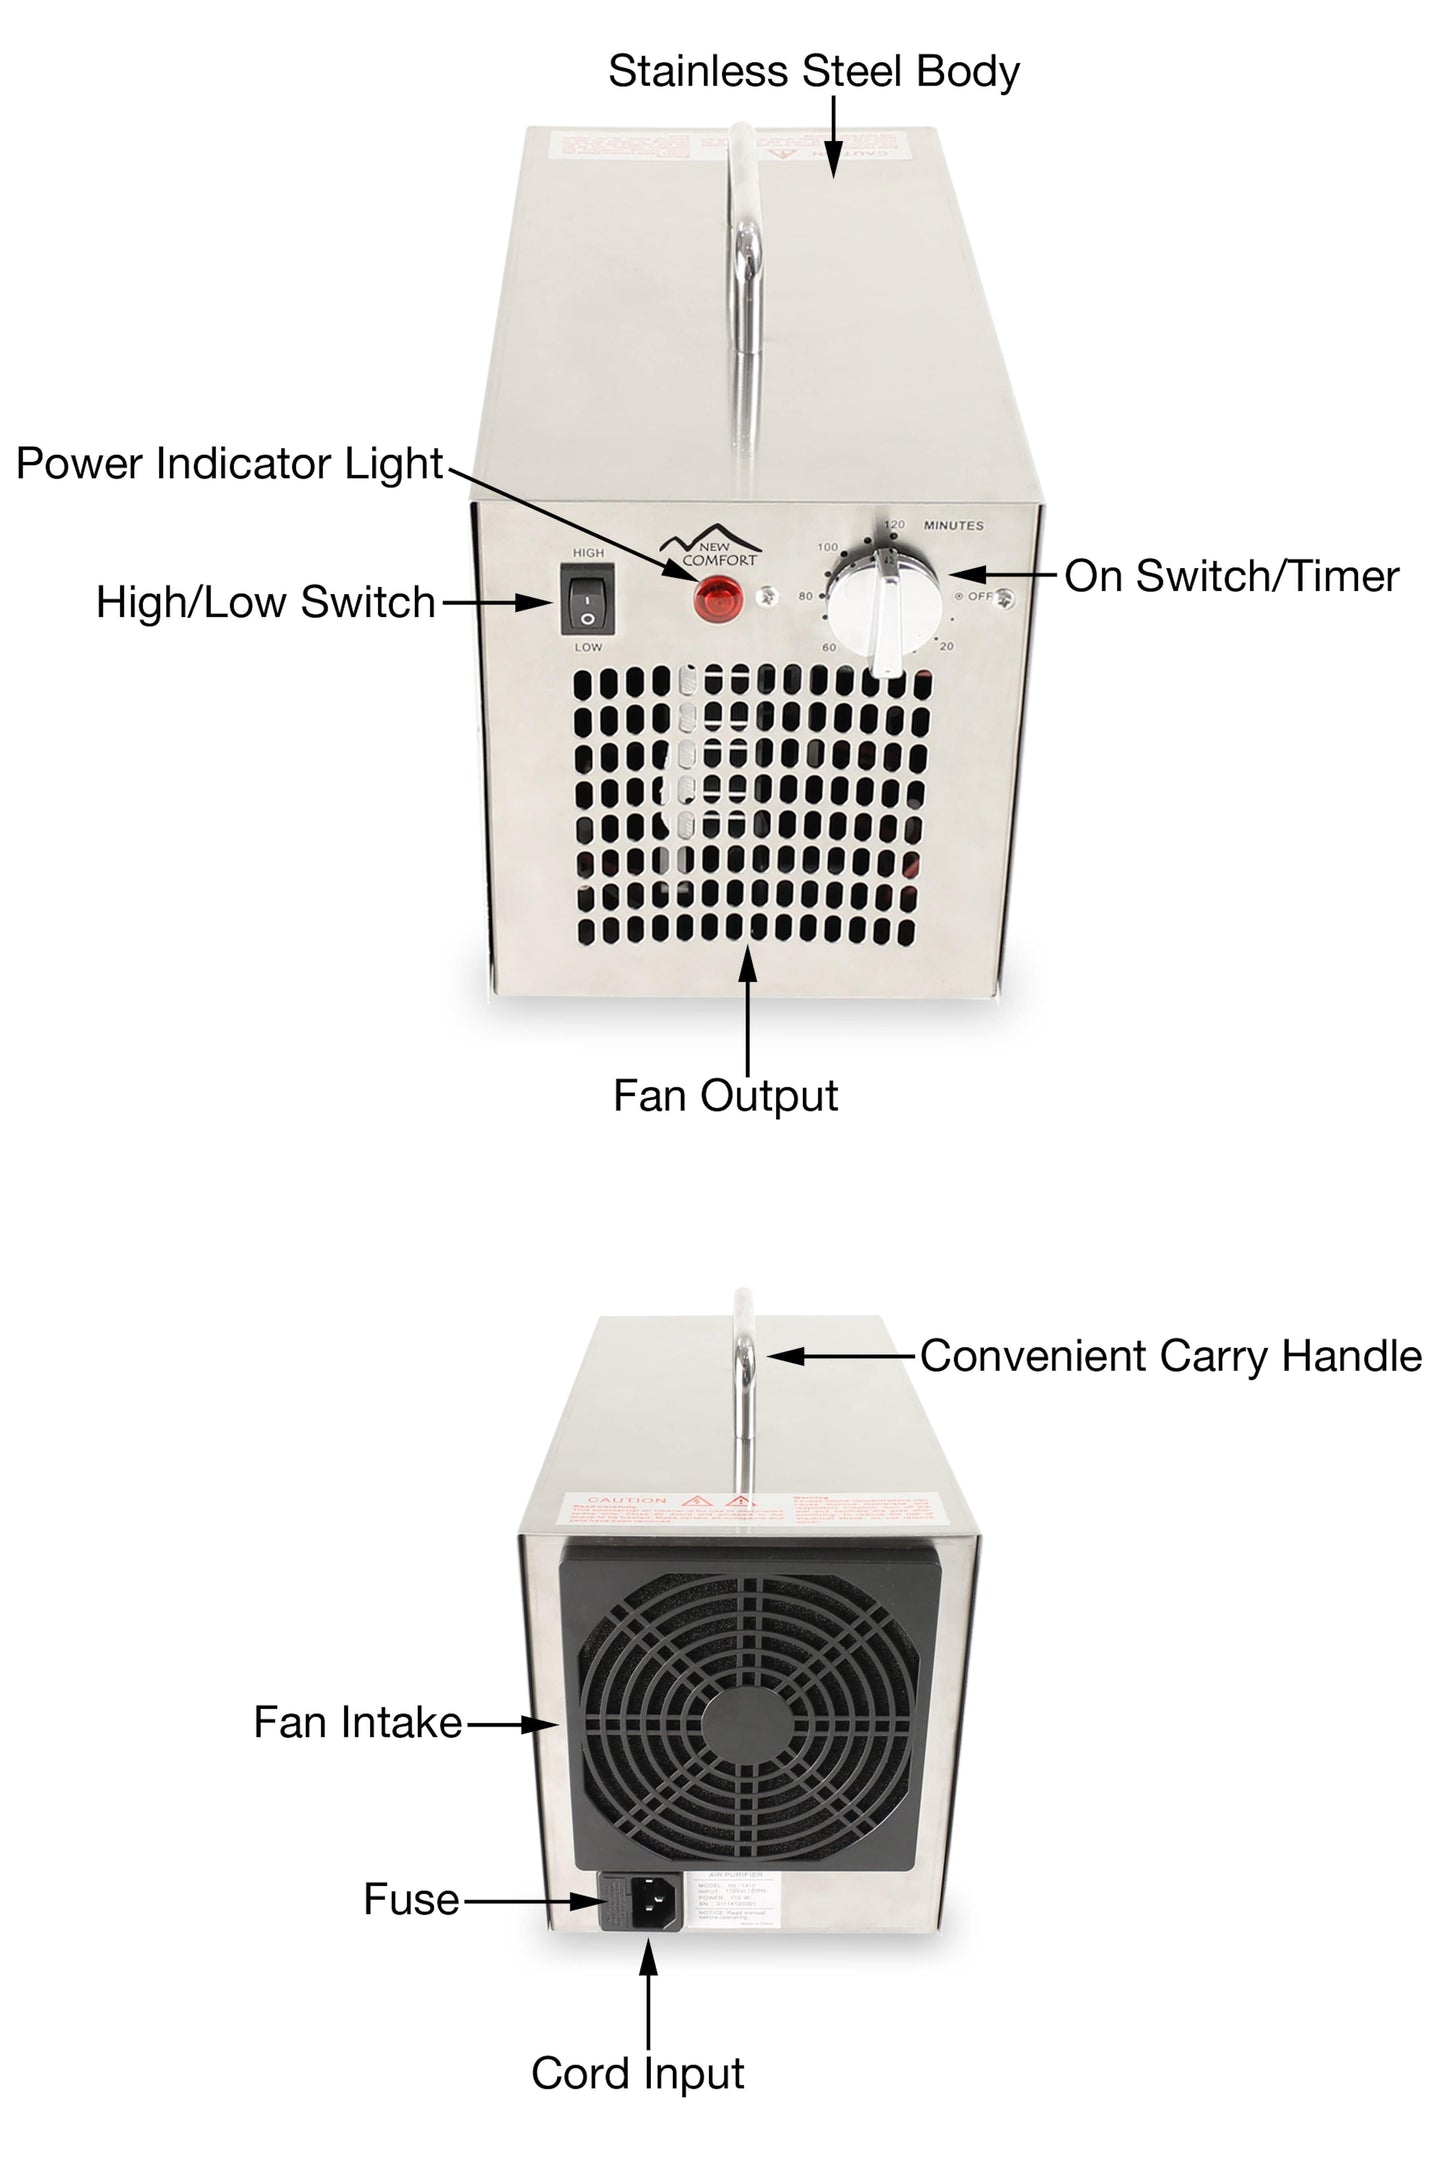 Demo Unit Stainless Steel Commercial Ozone Generating Air Purifier by New Comfort